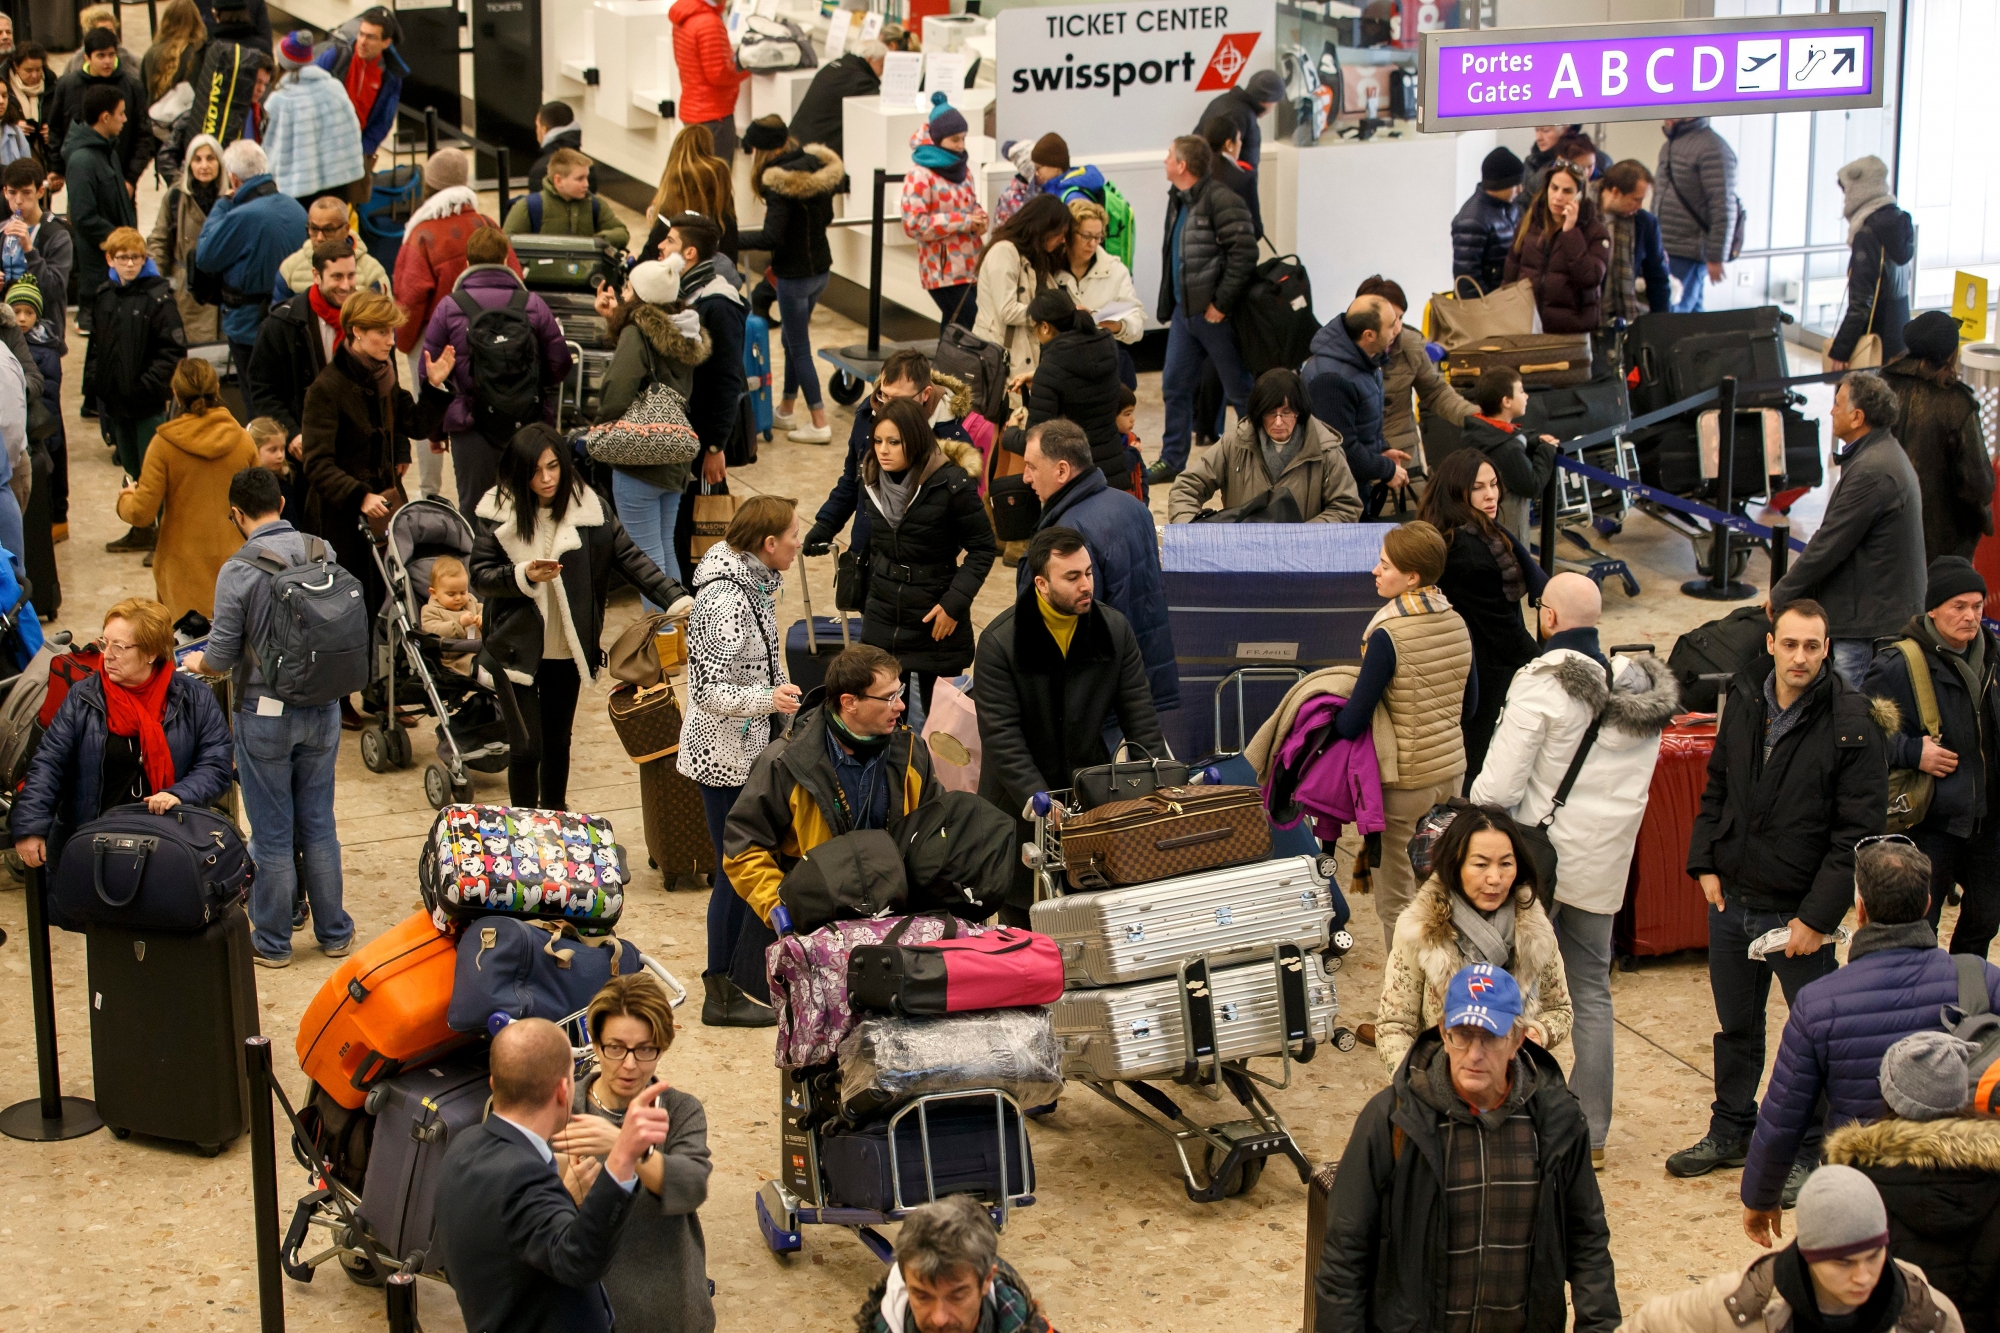 Flight passengers arrive in the check-in area, at the Geneva Airport, in Geneva, Switzerland, Sunday, January 8, 2017. Thousands of skiers and travelers are expected at the airport after celebrating Christmas and New Year for returning in their countries. (KEYSTONE/Salvatore Di Nolfi) SWITZERLAND FEATURE AIRPORT GENEVA